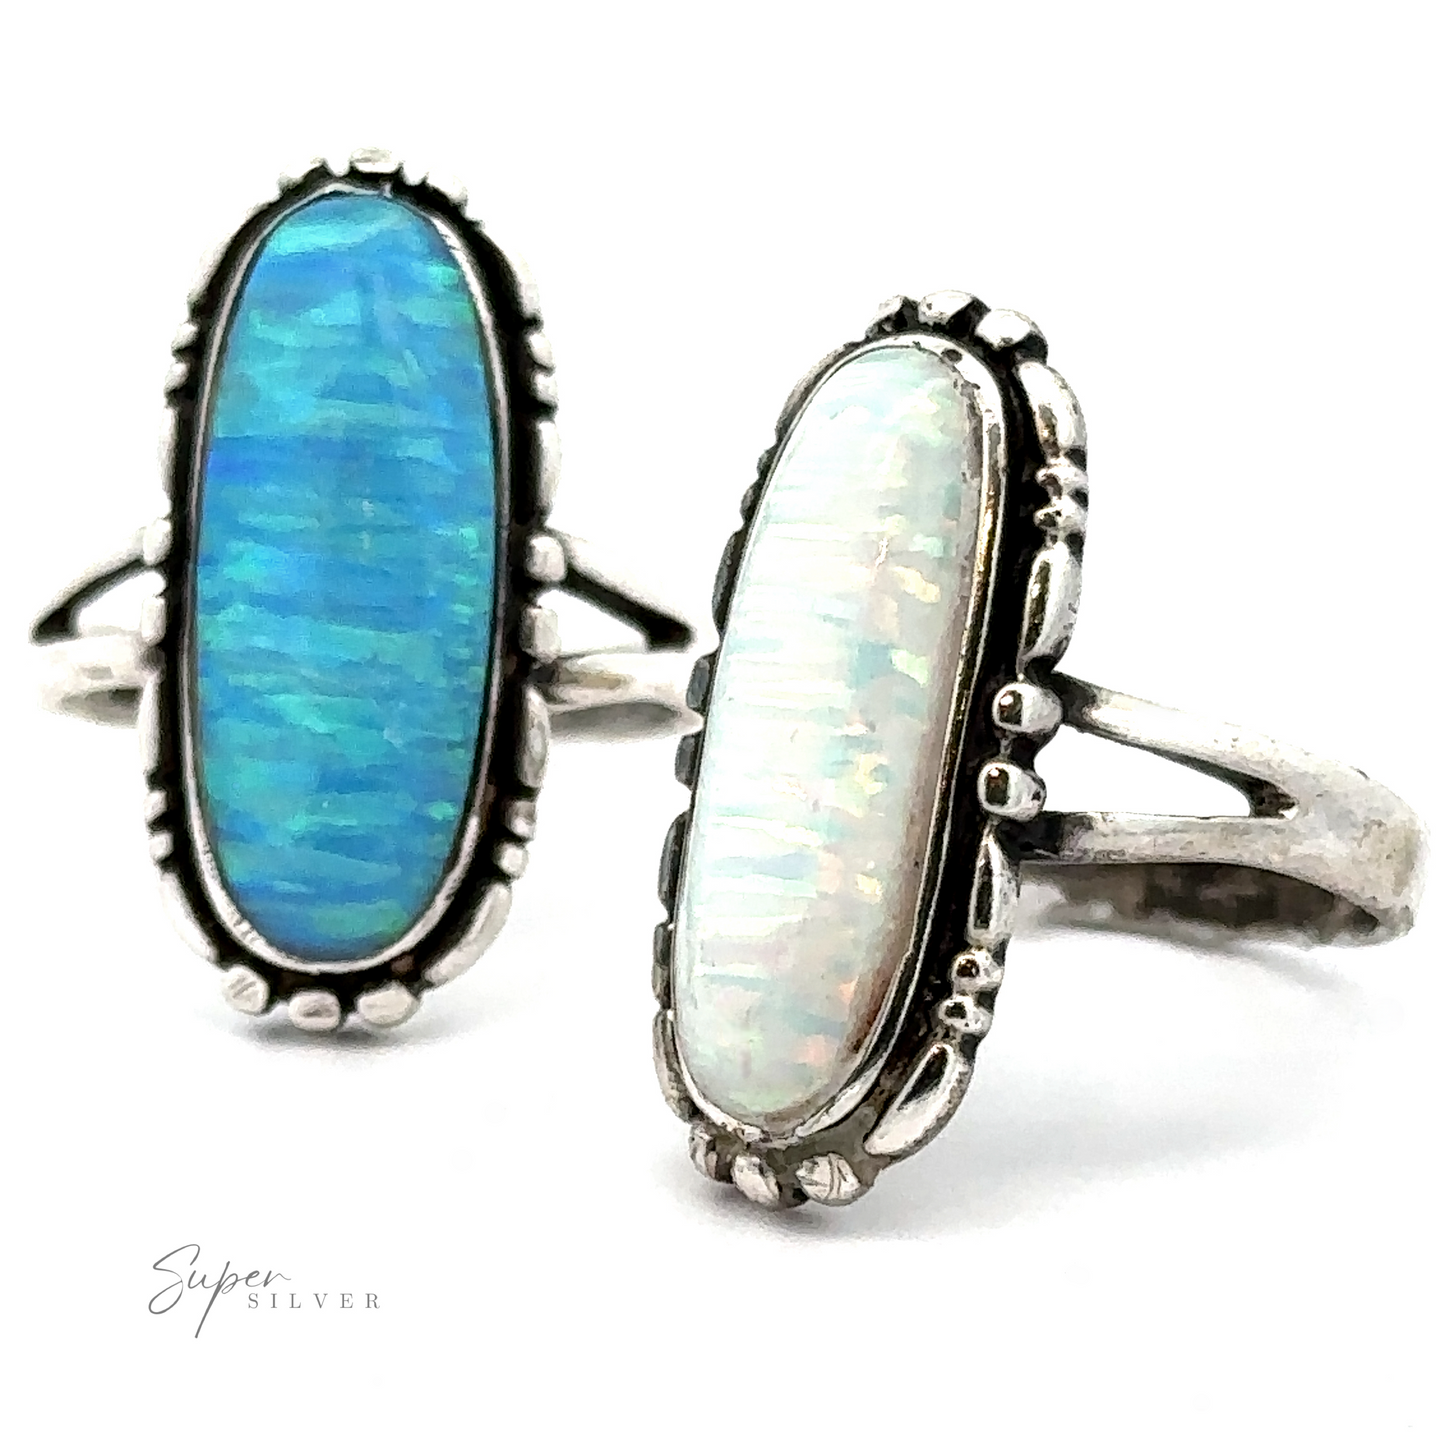 
                  
                    Two Southwestern-styled silver rings with elongated oval stones; one features a vibrant blue stone, and the other has a light, lab-created opal. Both rings have decorative sterling silver settings. The logo "American Made Oval Opal Ring" is at the bottom left.
                  
                